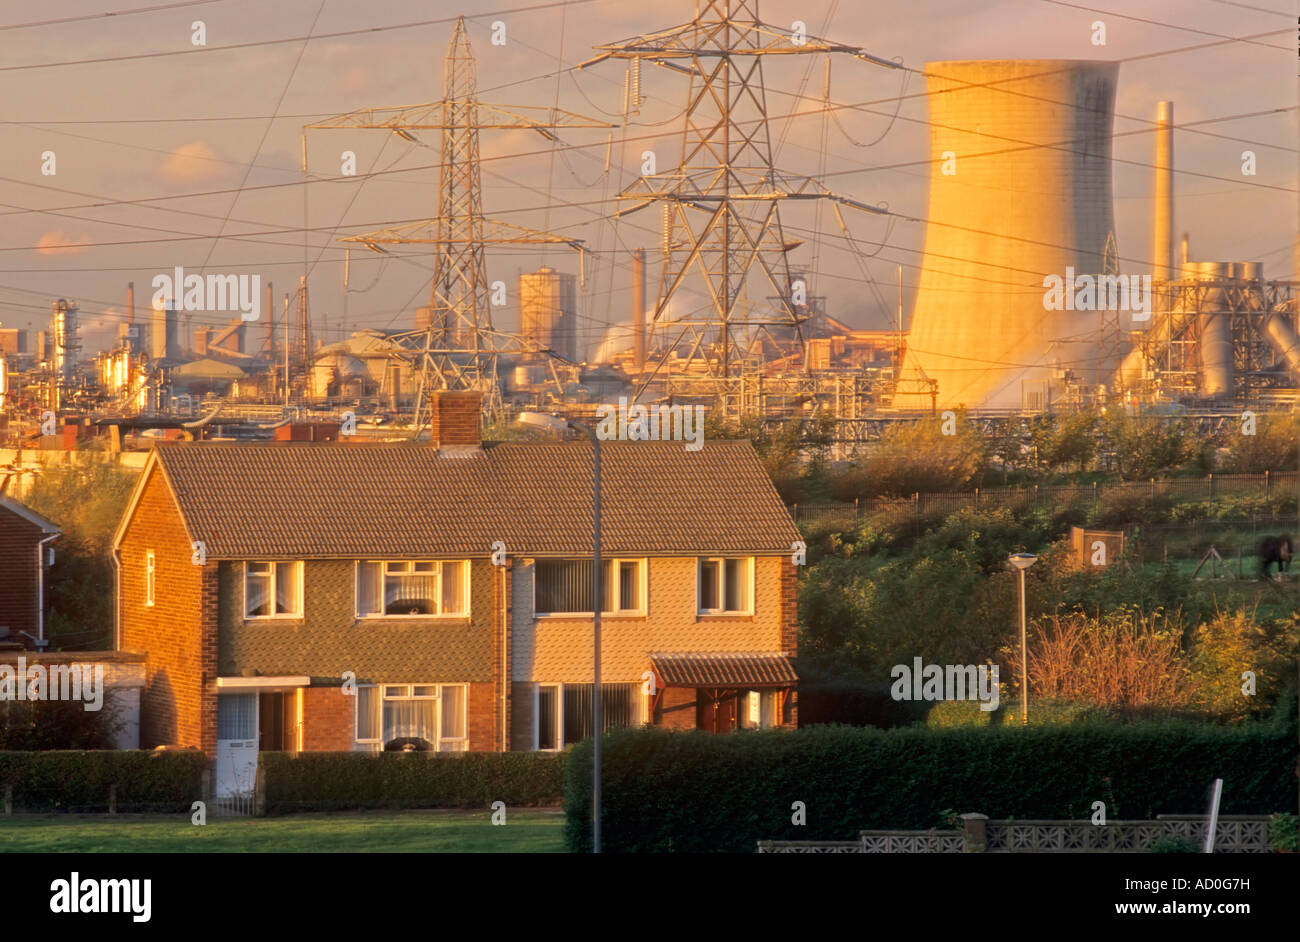 Industrial pollution, residential area, Middlesbrough, England, UK Stock Photo